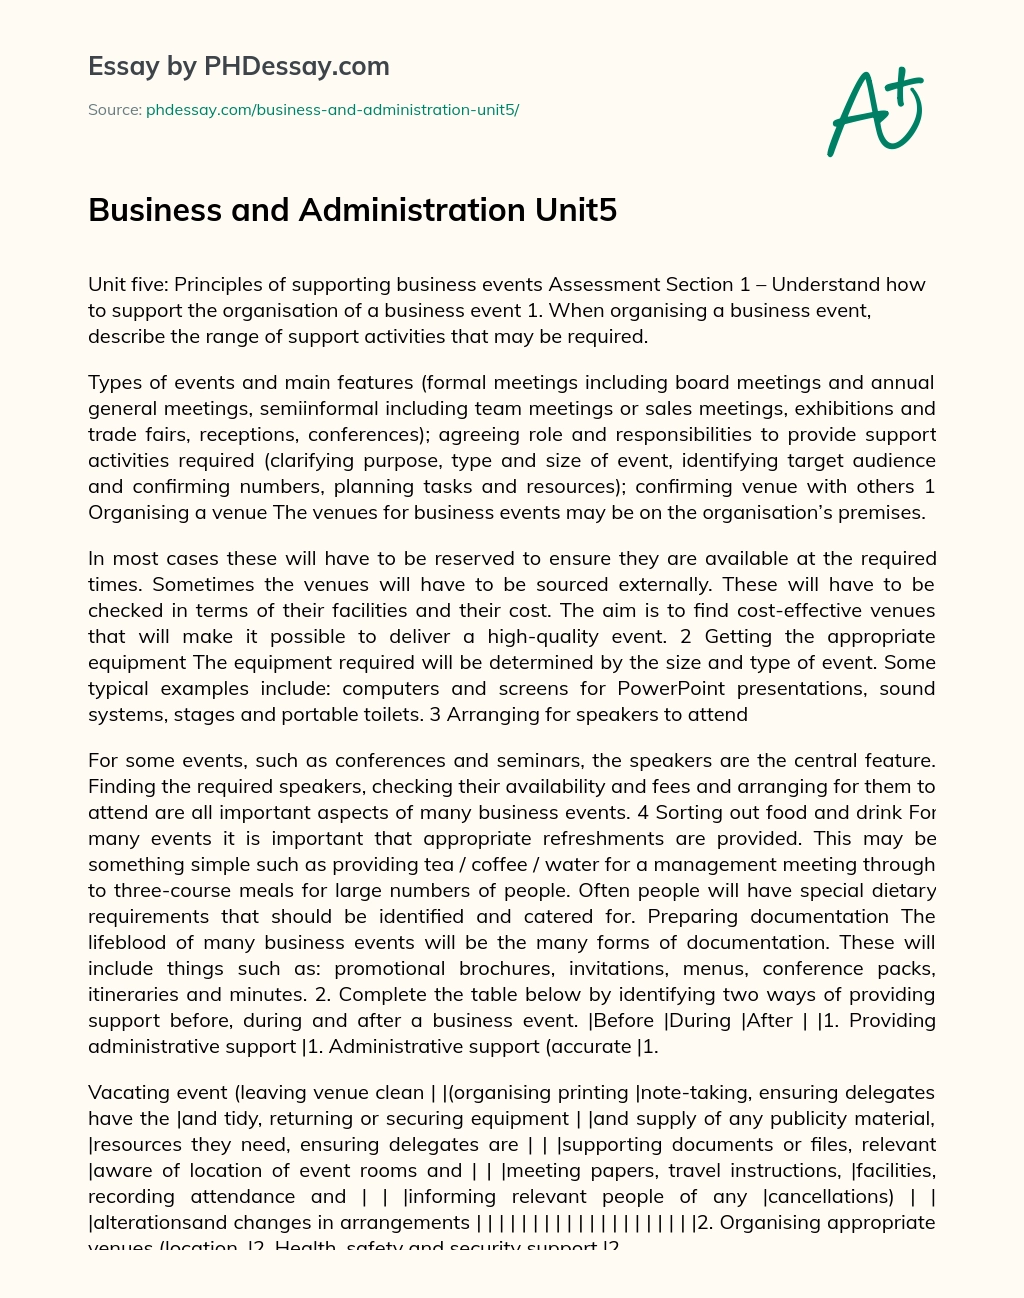 Business and Administration Unit5 essay